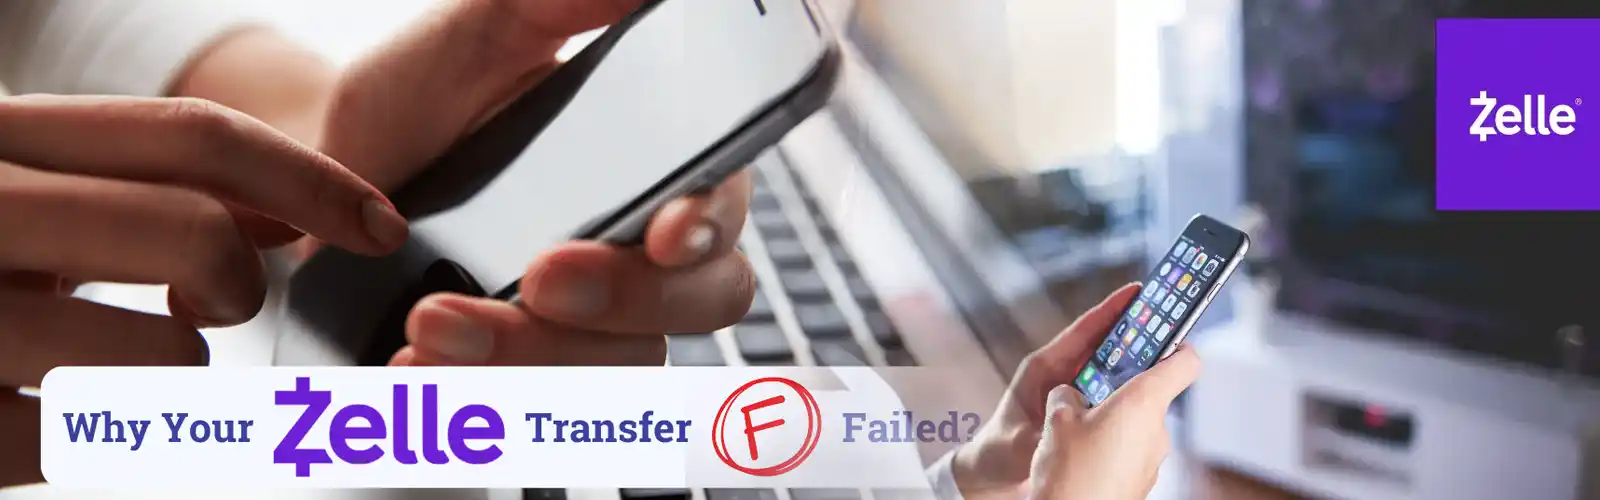 Why-Are-My-Zelle-Transfers-Failing